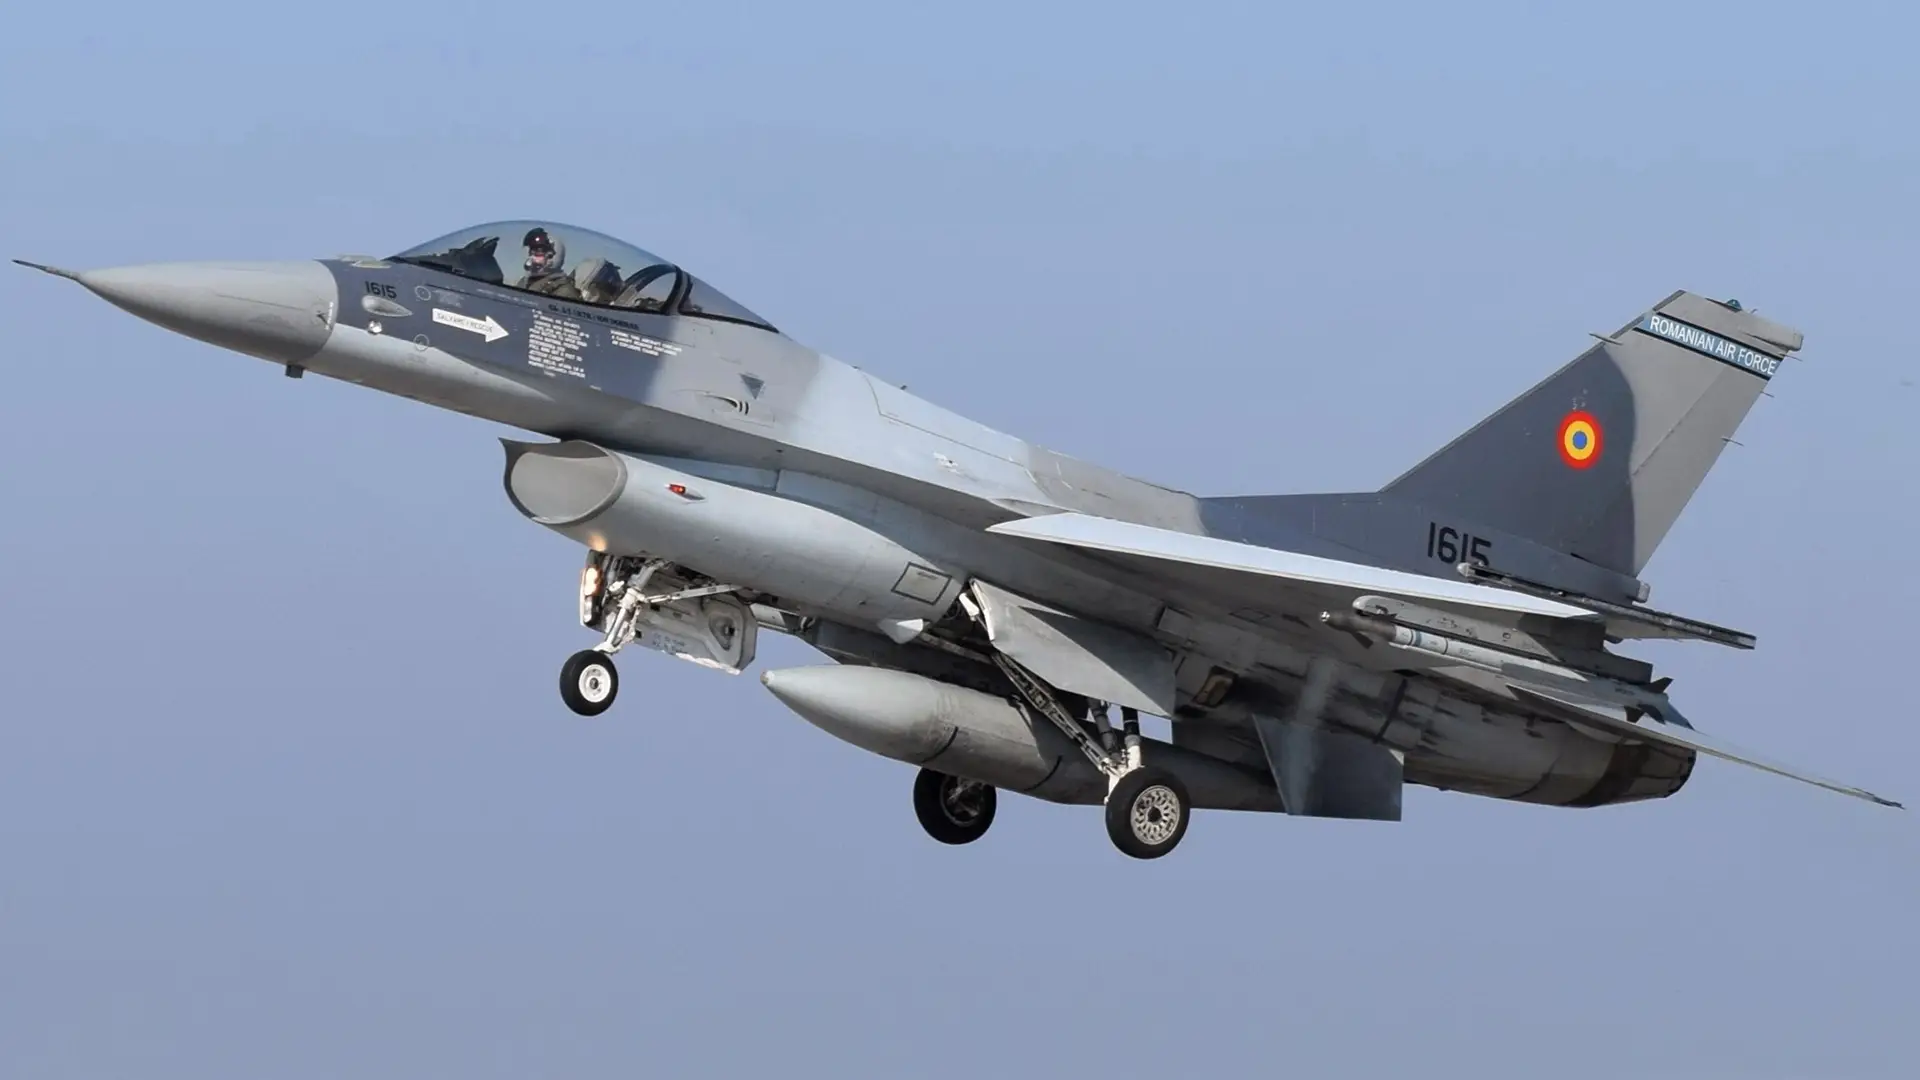 Romanian F-16 aircraft Defense Express New Pilot Training Center for F-16 Aircraft Established as Key Nations Collaborate